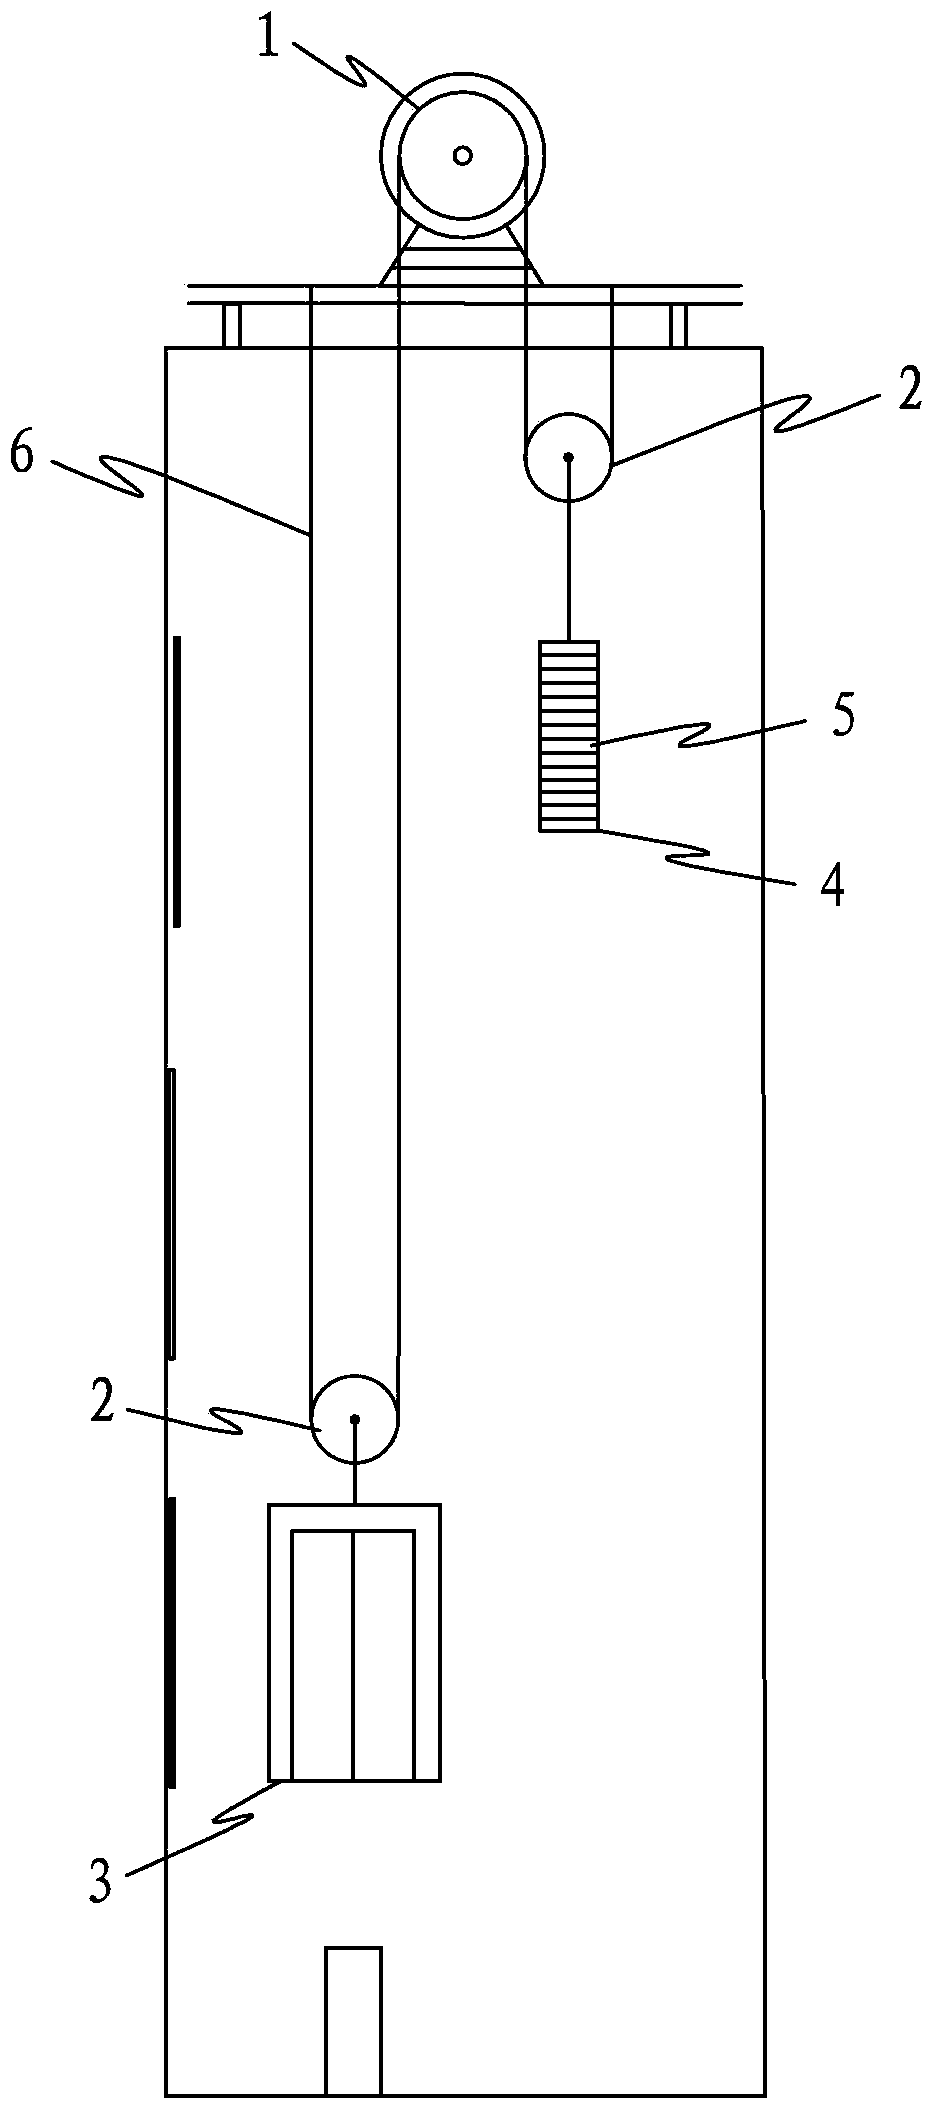 A drive structure of an elevator